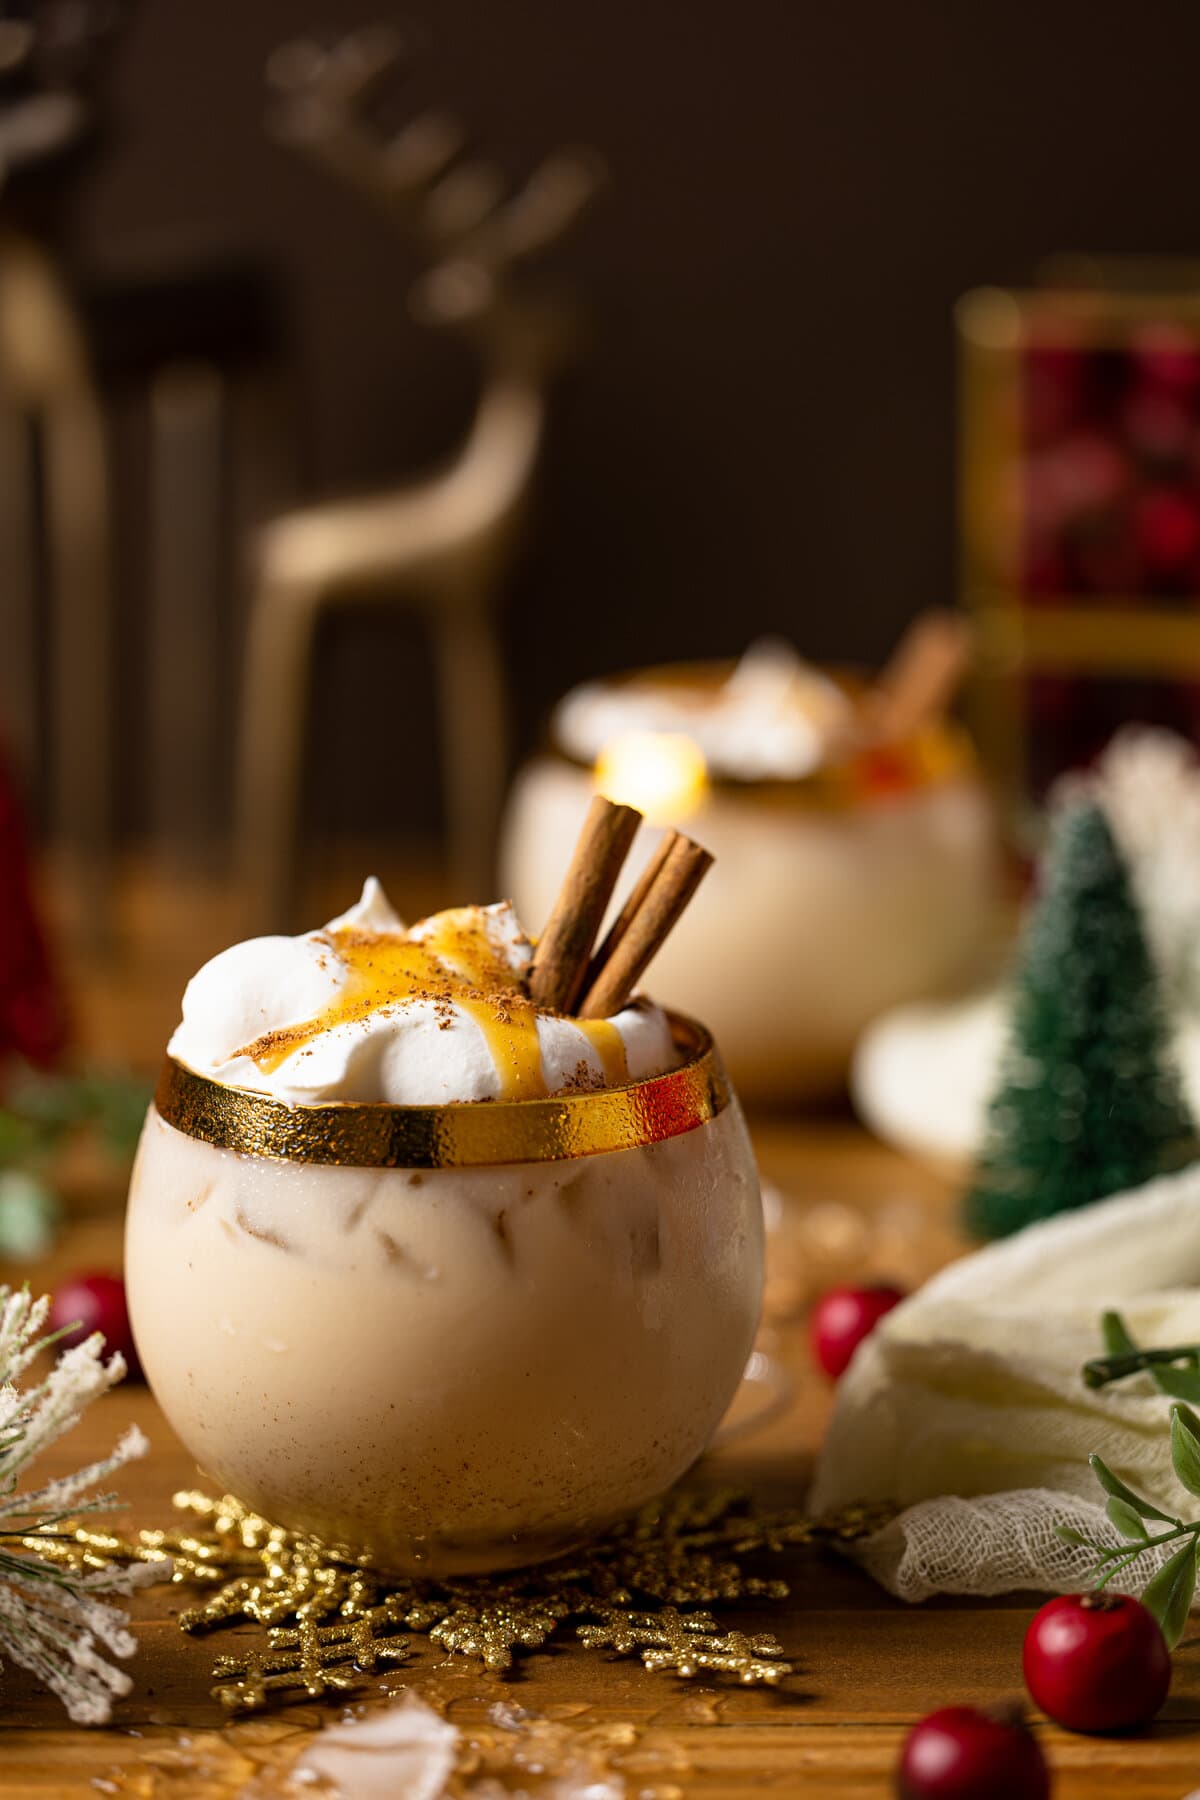 Vegan Caramel Eggnog Mocktail topped with coconut whipped cream, cinnamon sticks, and caramel sauce